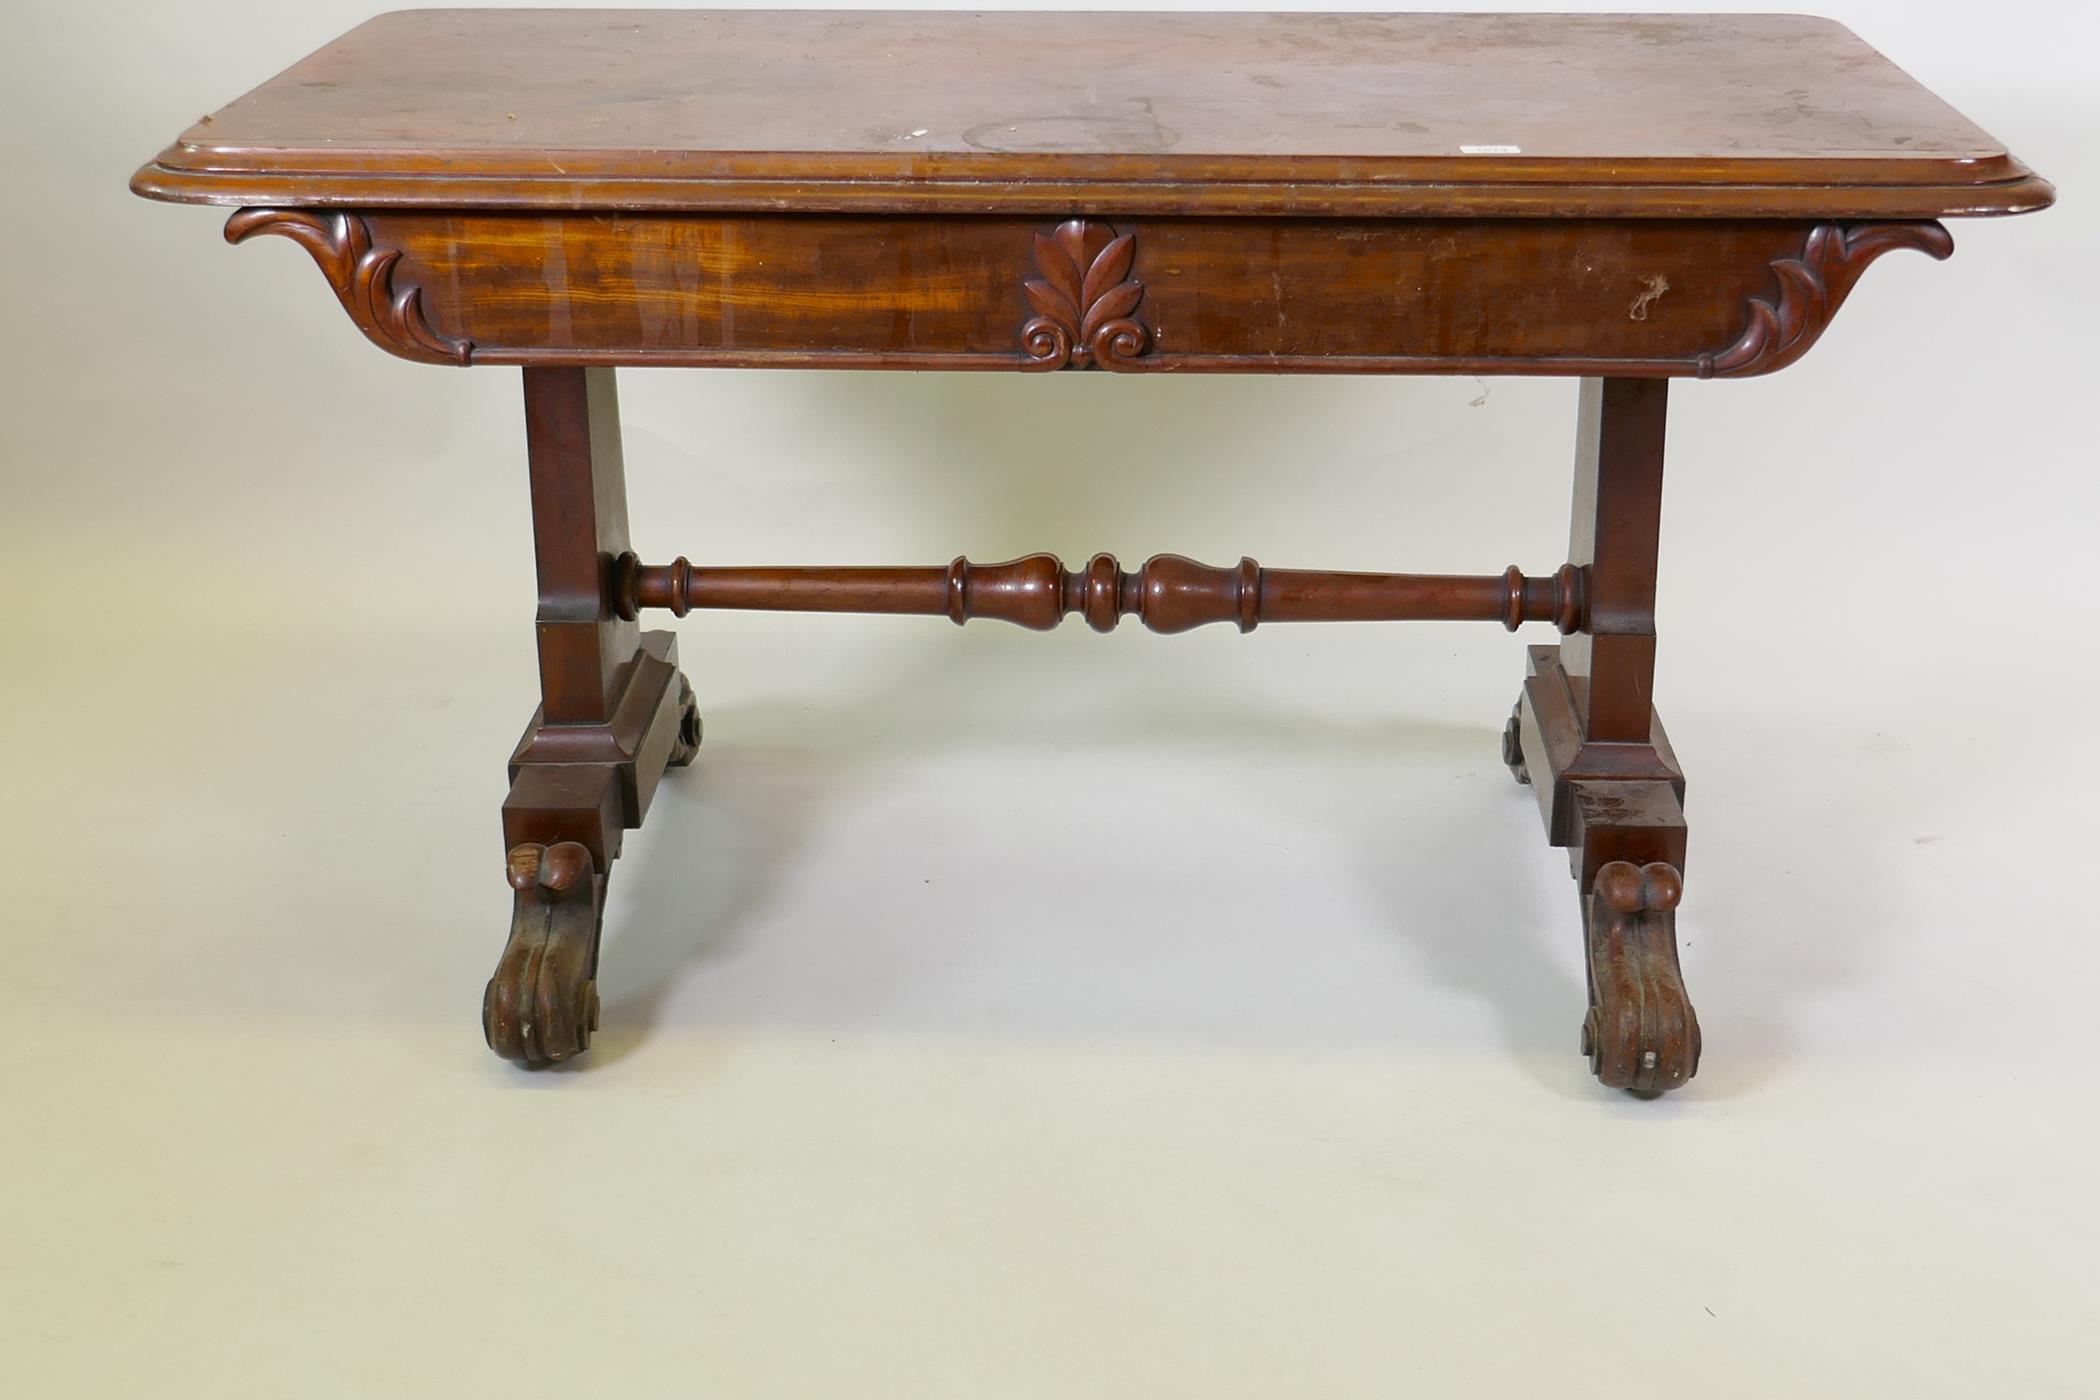 William IV mahogany centre table, raised on end supports with scroll feet, 130 x 70 x 70cm - Image 3 of 5